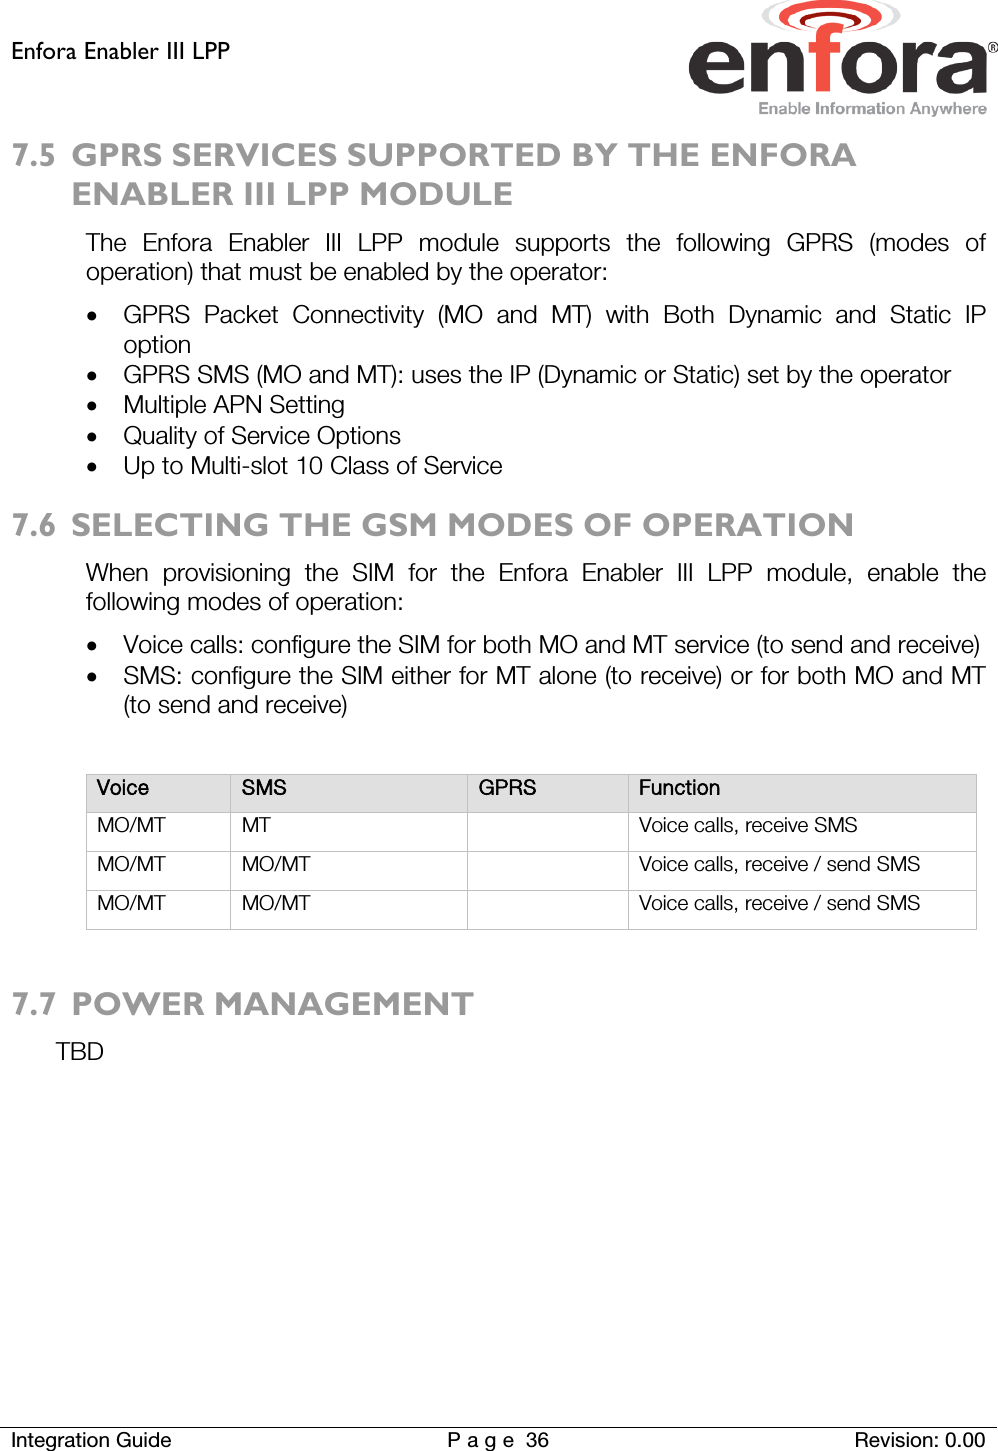 Enfora Enabler III LPP    Integration Guide Page 36 Revision: 0.00  7.5 GPRS SERVICES SUPPORTED BY THE ENFORA ENABLER III LPP MODULE The Enfora Enabler III LPP module supports the following GPRS (modes of operation) that must be enabled by the operator: • GPRS Packet Connectivity (MO and MT) with Both Dynamic and Static IP option • GPRS SMS (MO and MT): uses the IP (Dynamic or Static) set by the operator • Multiple APN Setting • Quality of Service Options • Up to Multi-slot 10 Class of Service 7.6 SELECTING THE GSM MODES OF OPERATION When provisioning the SIM for the Enfora Enabler III LPP module, enable the following modes of operation: • Voice calls: configure the SIM for both MO and MT service (to send and receive) • SMS: configure the SIM either for MT alone (to receive) or for both MO and MT (to send and receive)  Voice SMS GPRS Function MO/MT MT  Voice calls, receive SMS MO/MT MO/MT  Voice calls, receive / send SMS MO/MT MO/MT  Voice calls, receive / send SMS  7.7 POWER MANAGEMENT TBD    